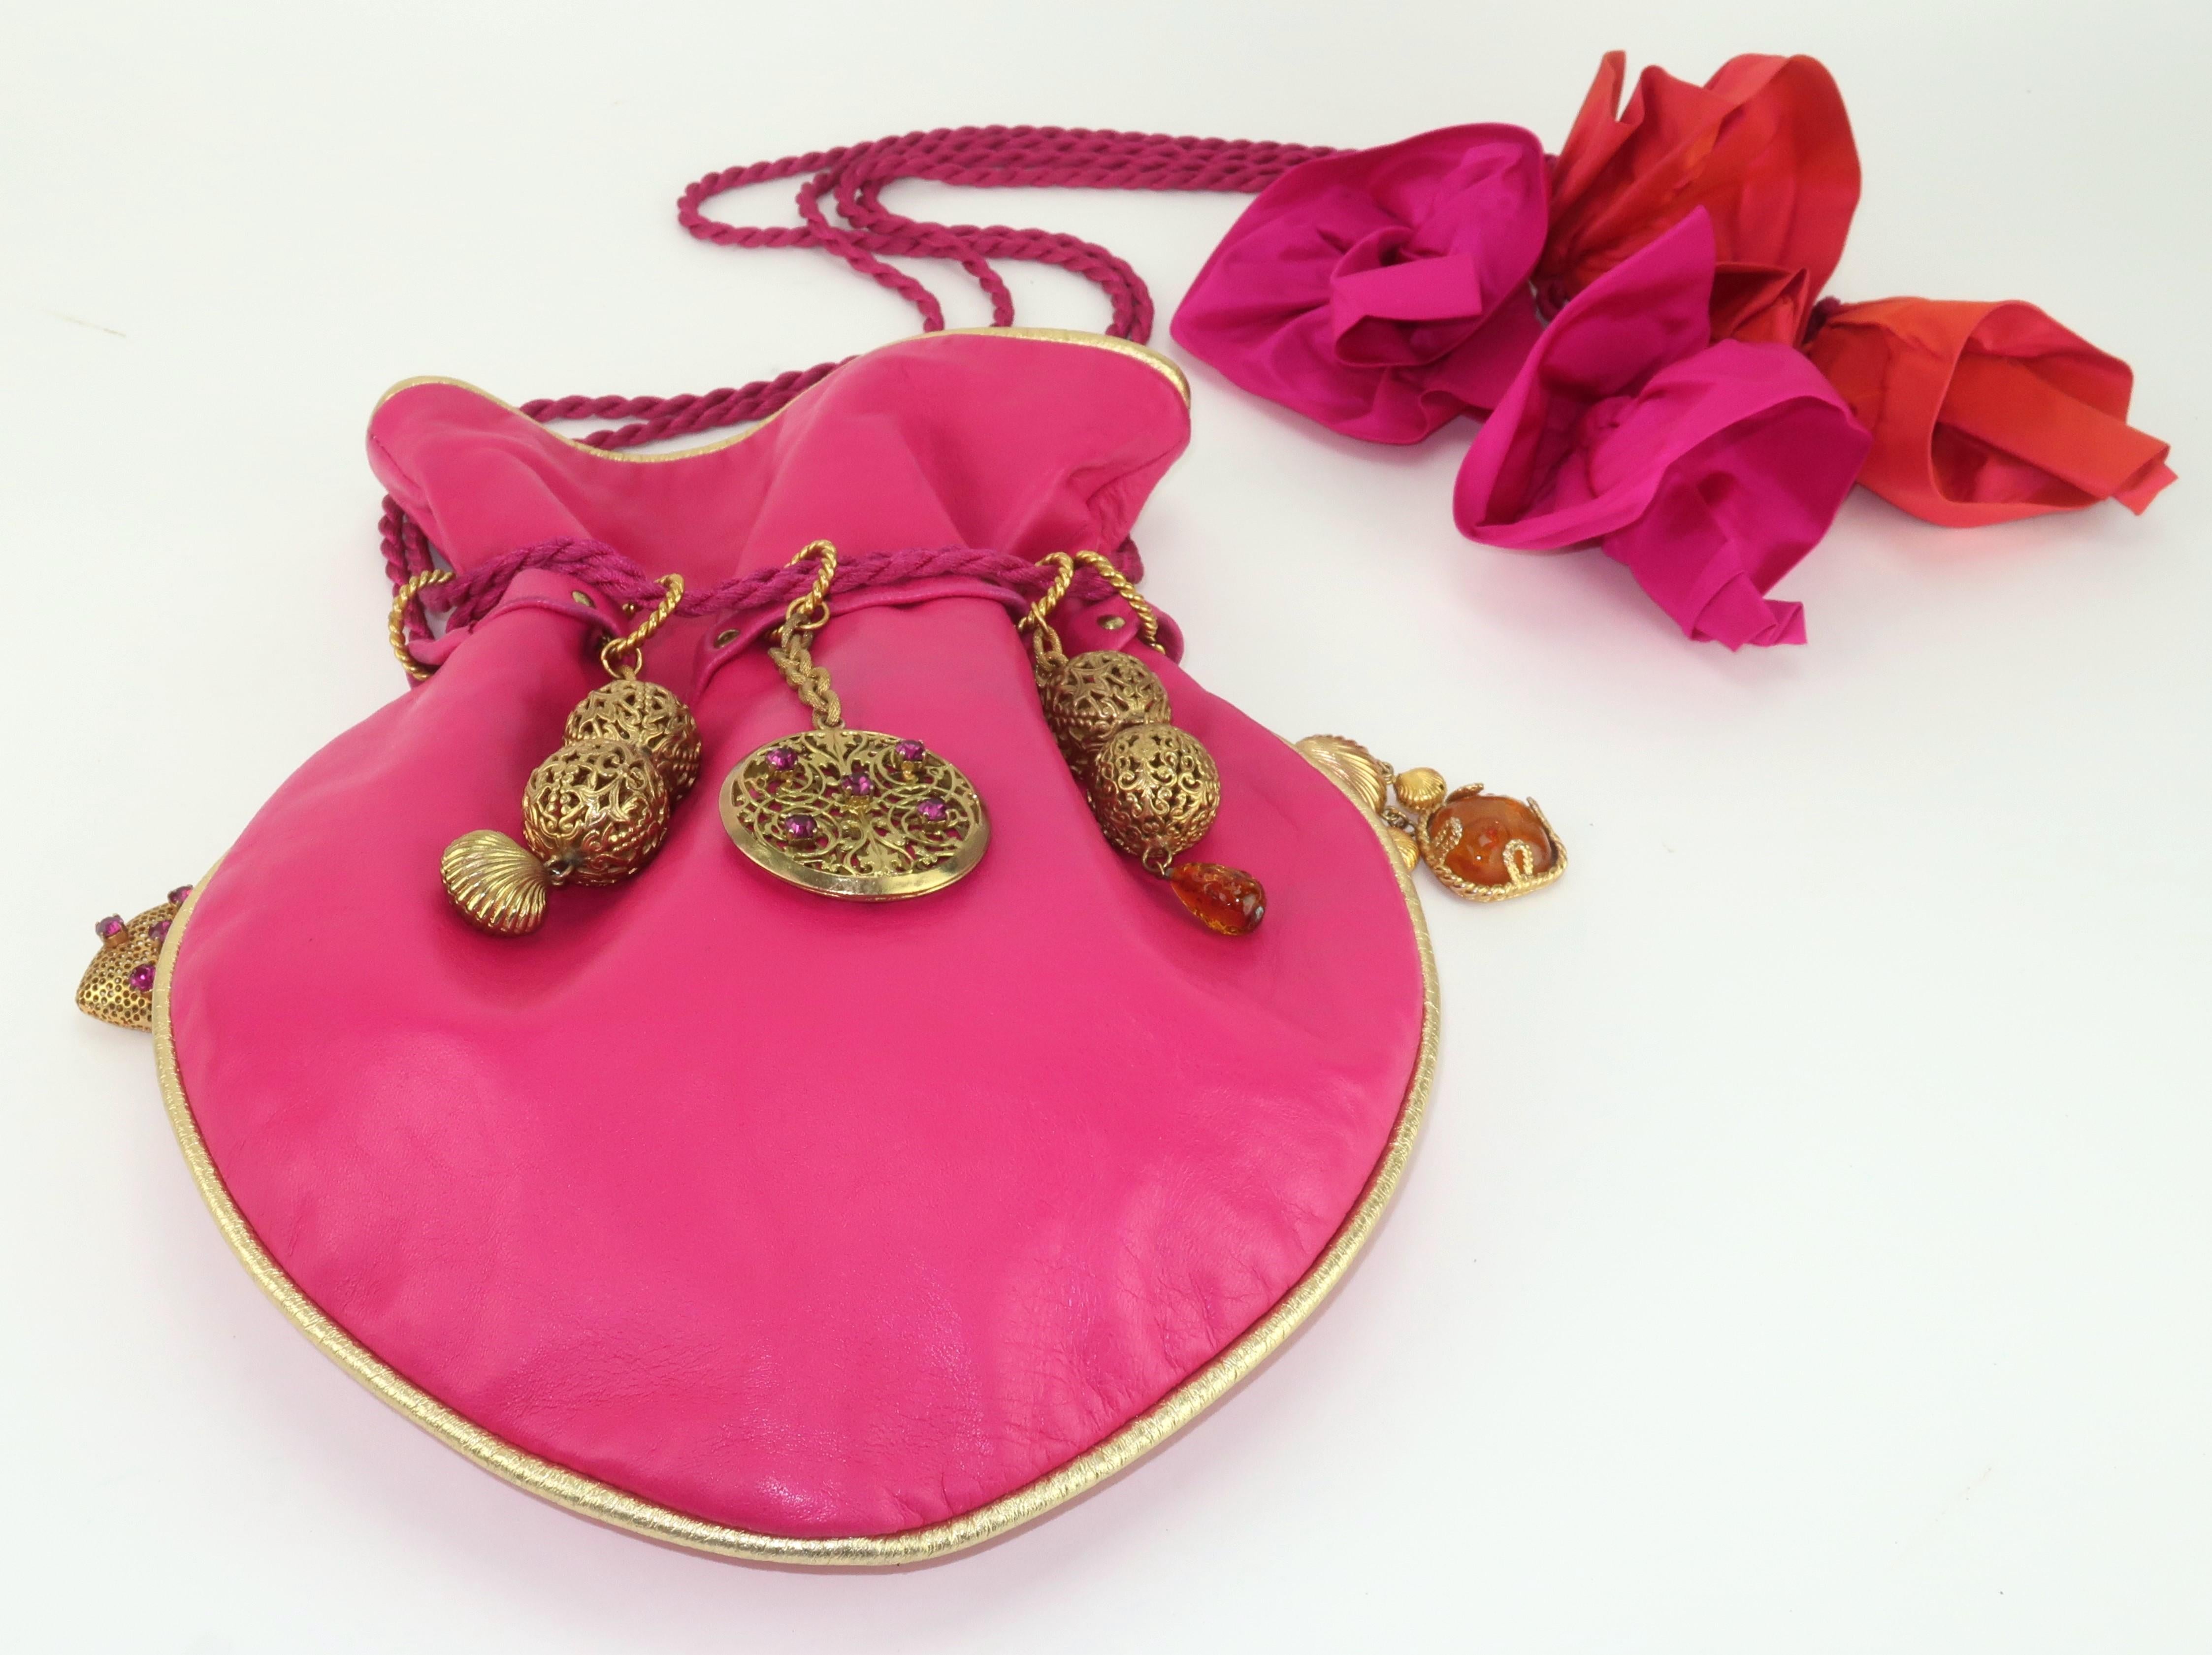 Late 1980's drawstring leather handbag by French jewelry designer, Dominique Aurientis, embellished with gold plated charms and medallions.  This fabulous handbag is a testament to 1980's maximalist style with a combination of a functional